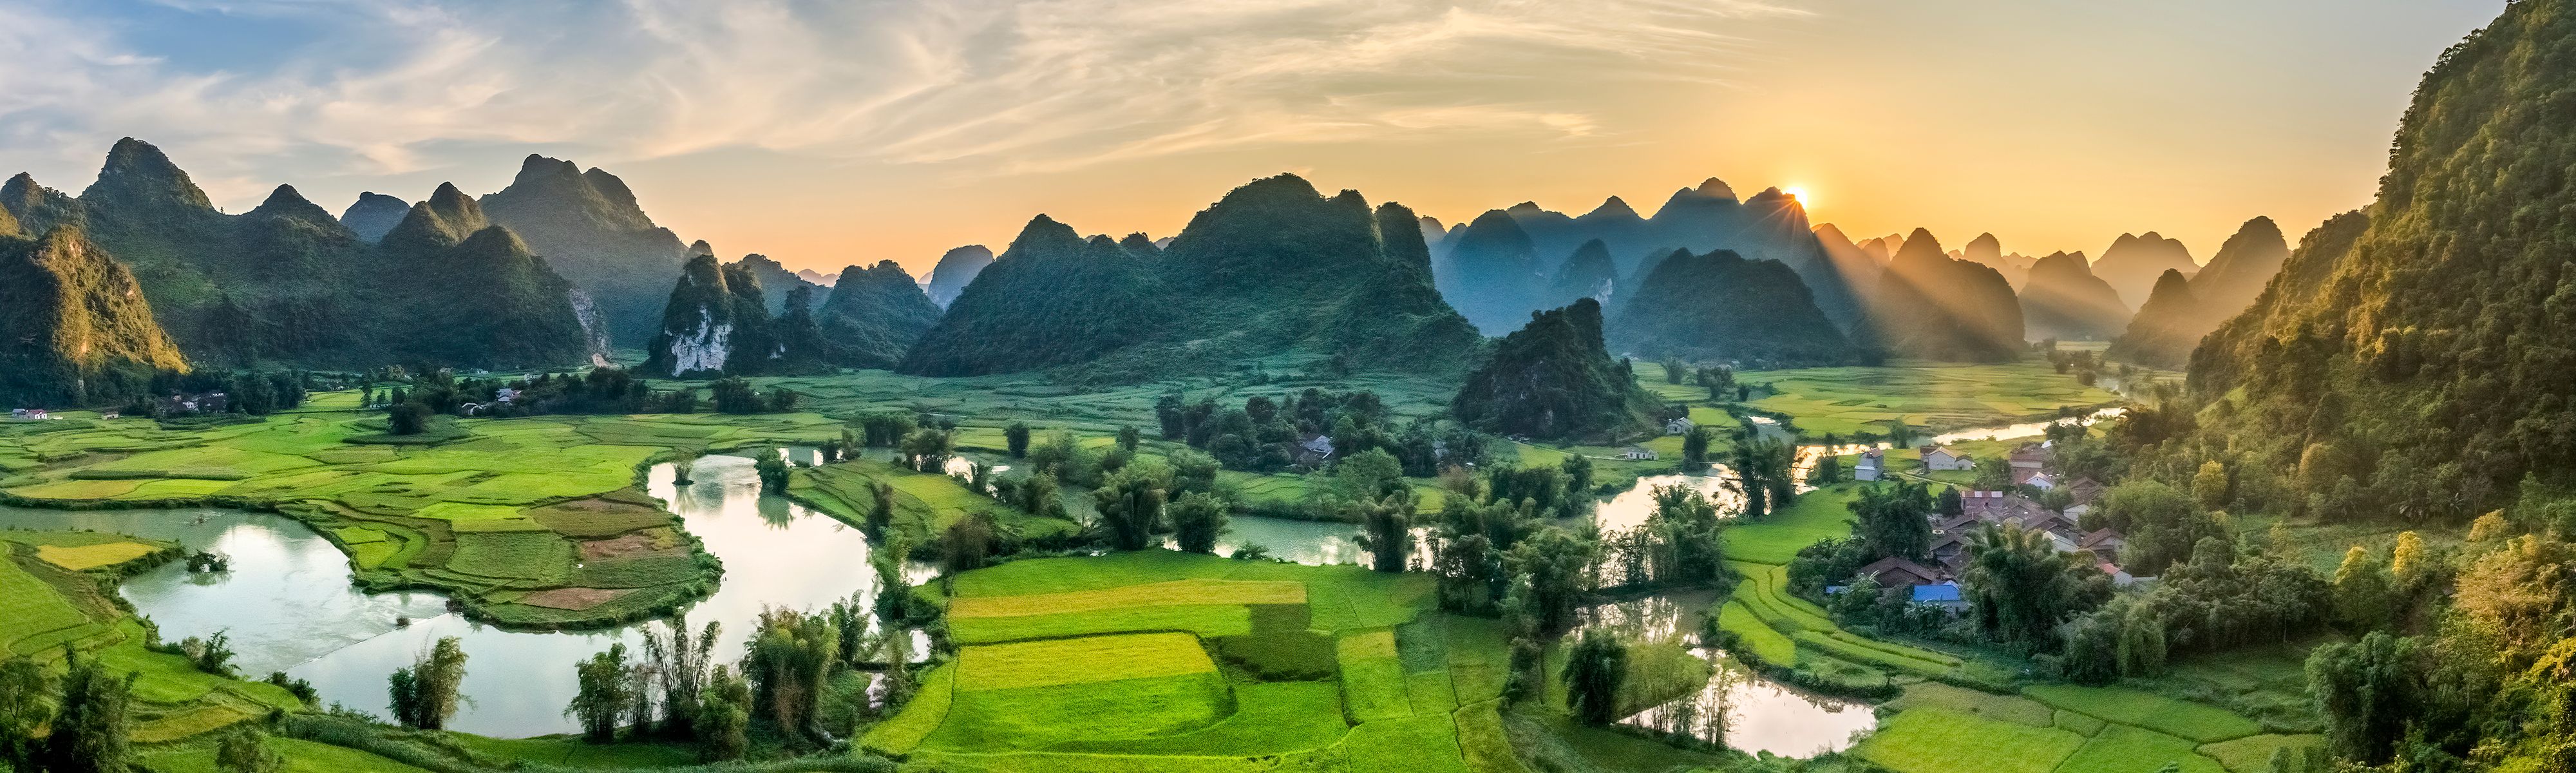 rice terrace paddle field at sunset at phong nam in vietnam